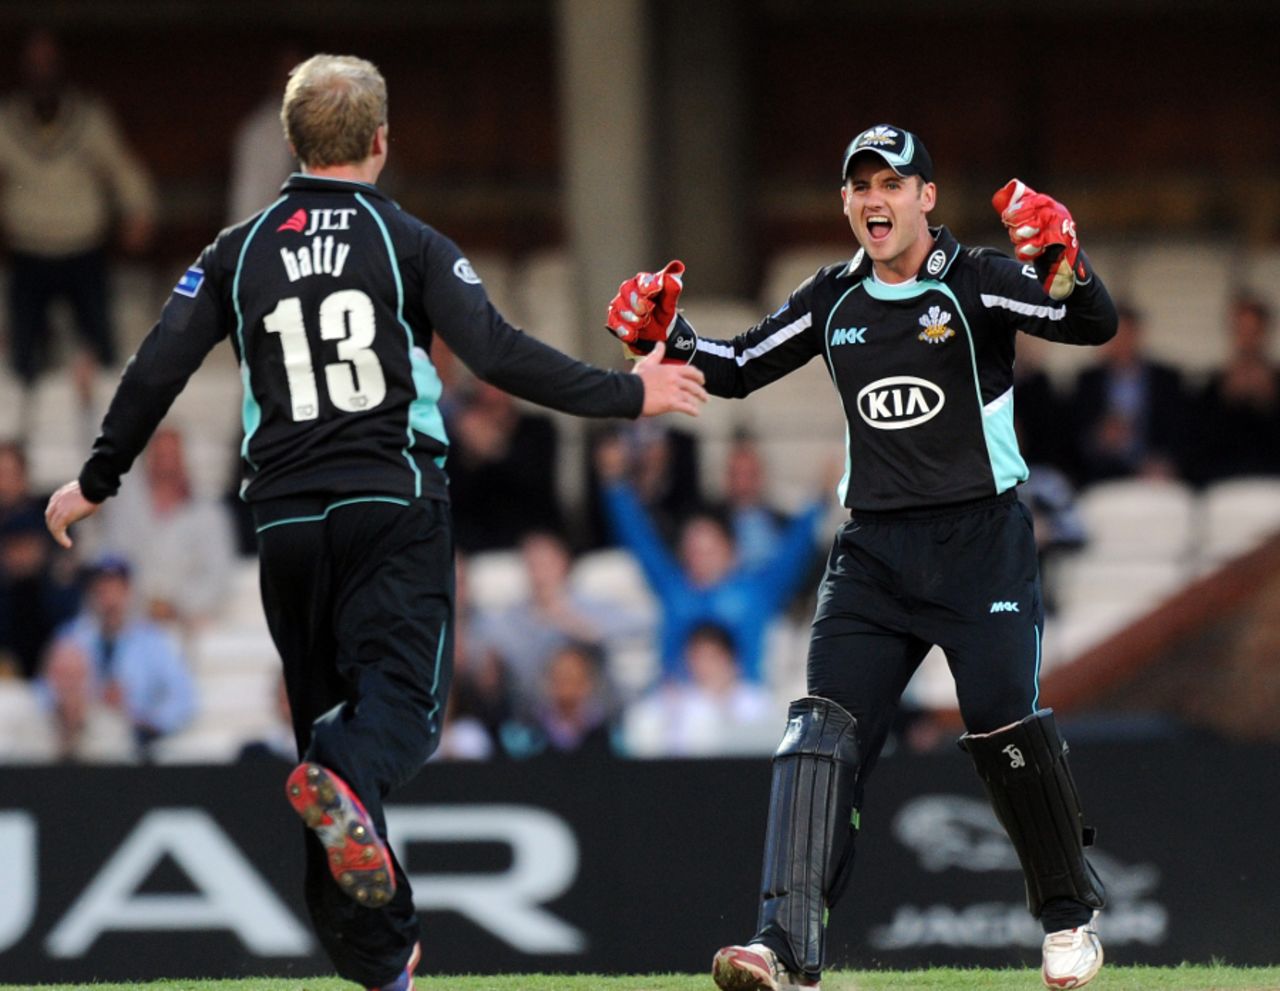 Gareth Batty took three wickets to help seal victory, Surrey v Essex, Friends Life t20, South Group, The Oval, June 13, 2012